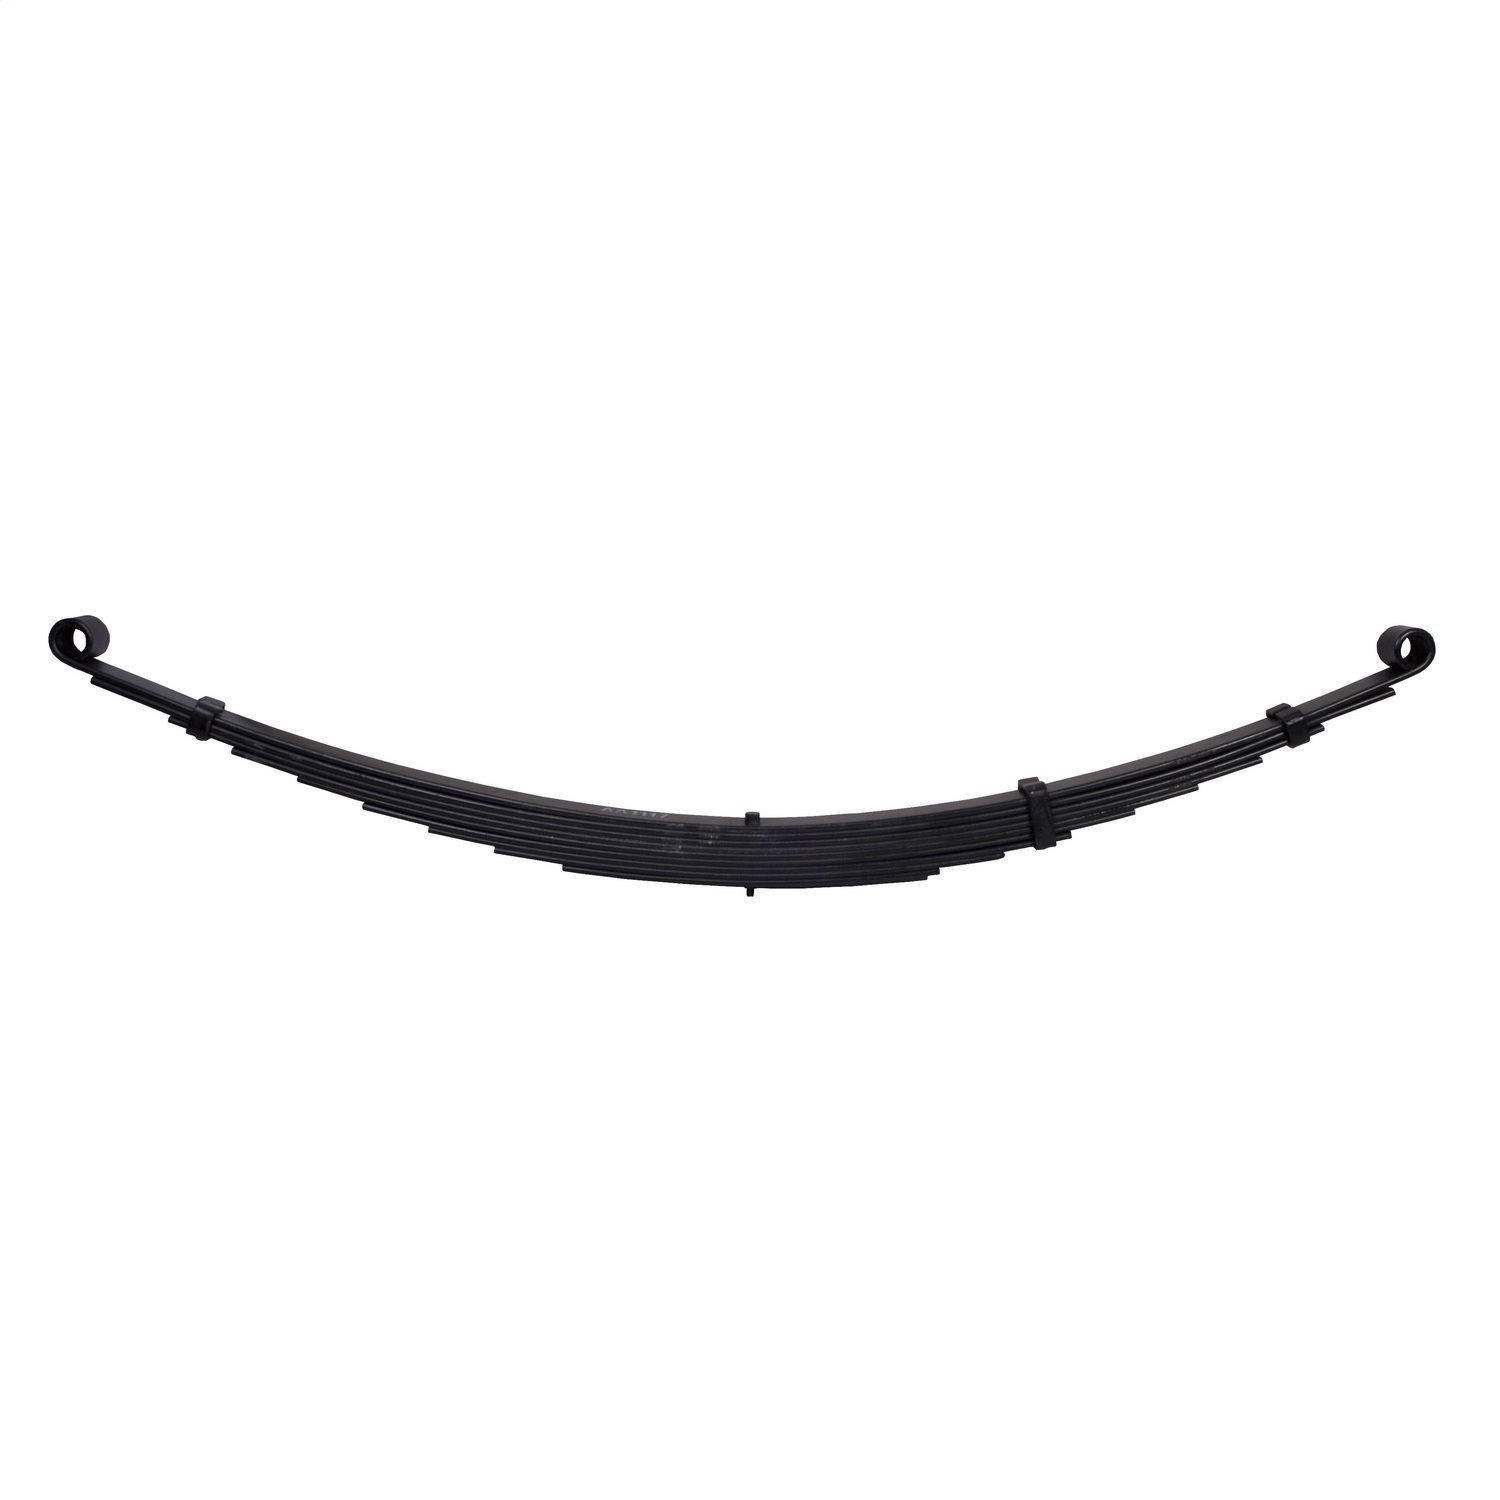 9 leaf replacement rear leaf spring from Omix-ADA, Fits 54-62 Willys Station Wagons with 226